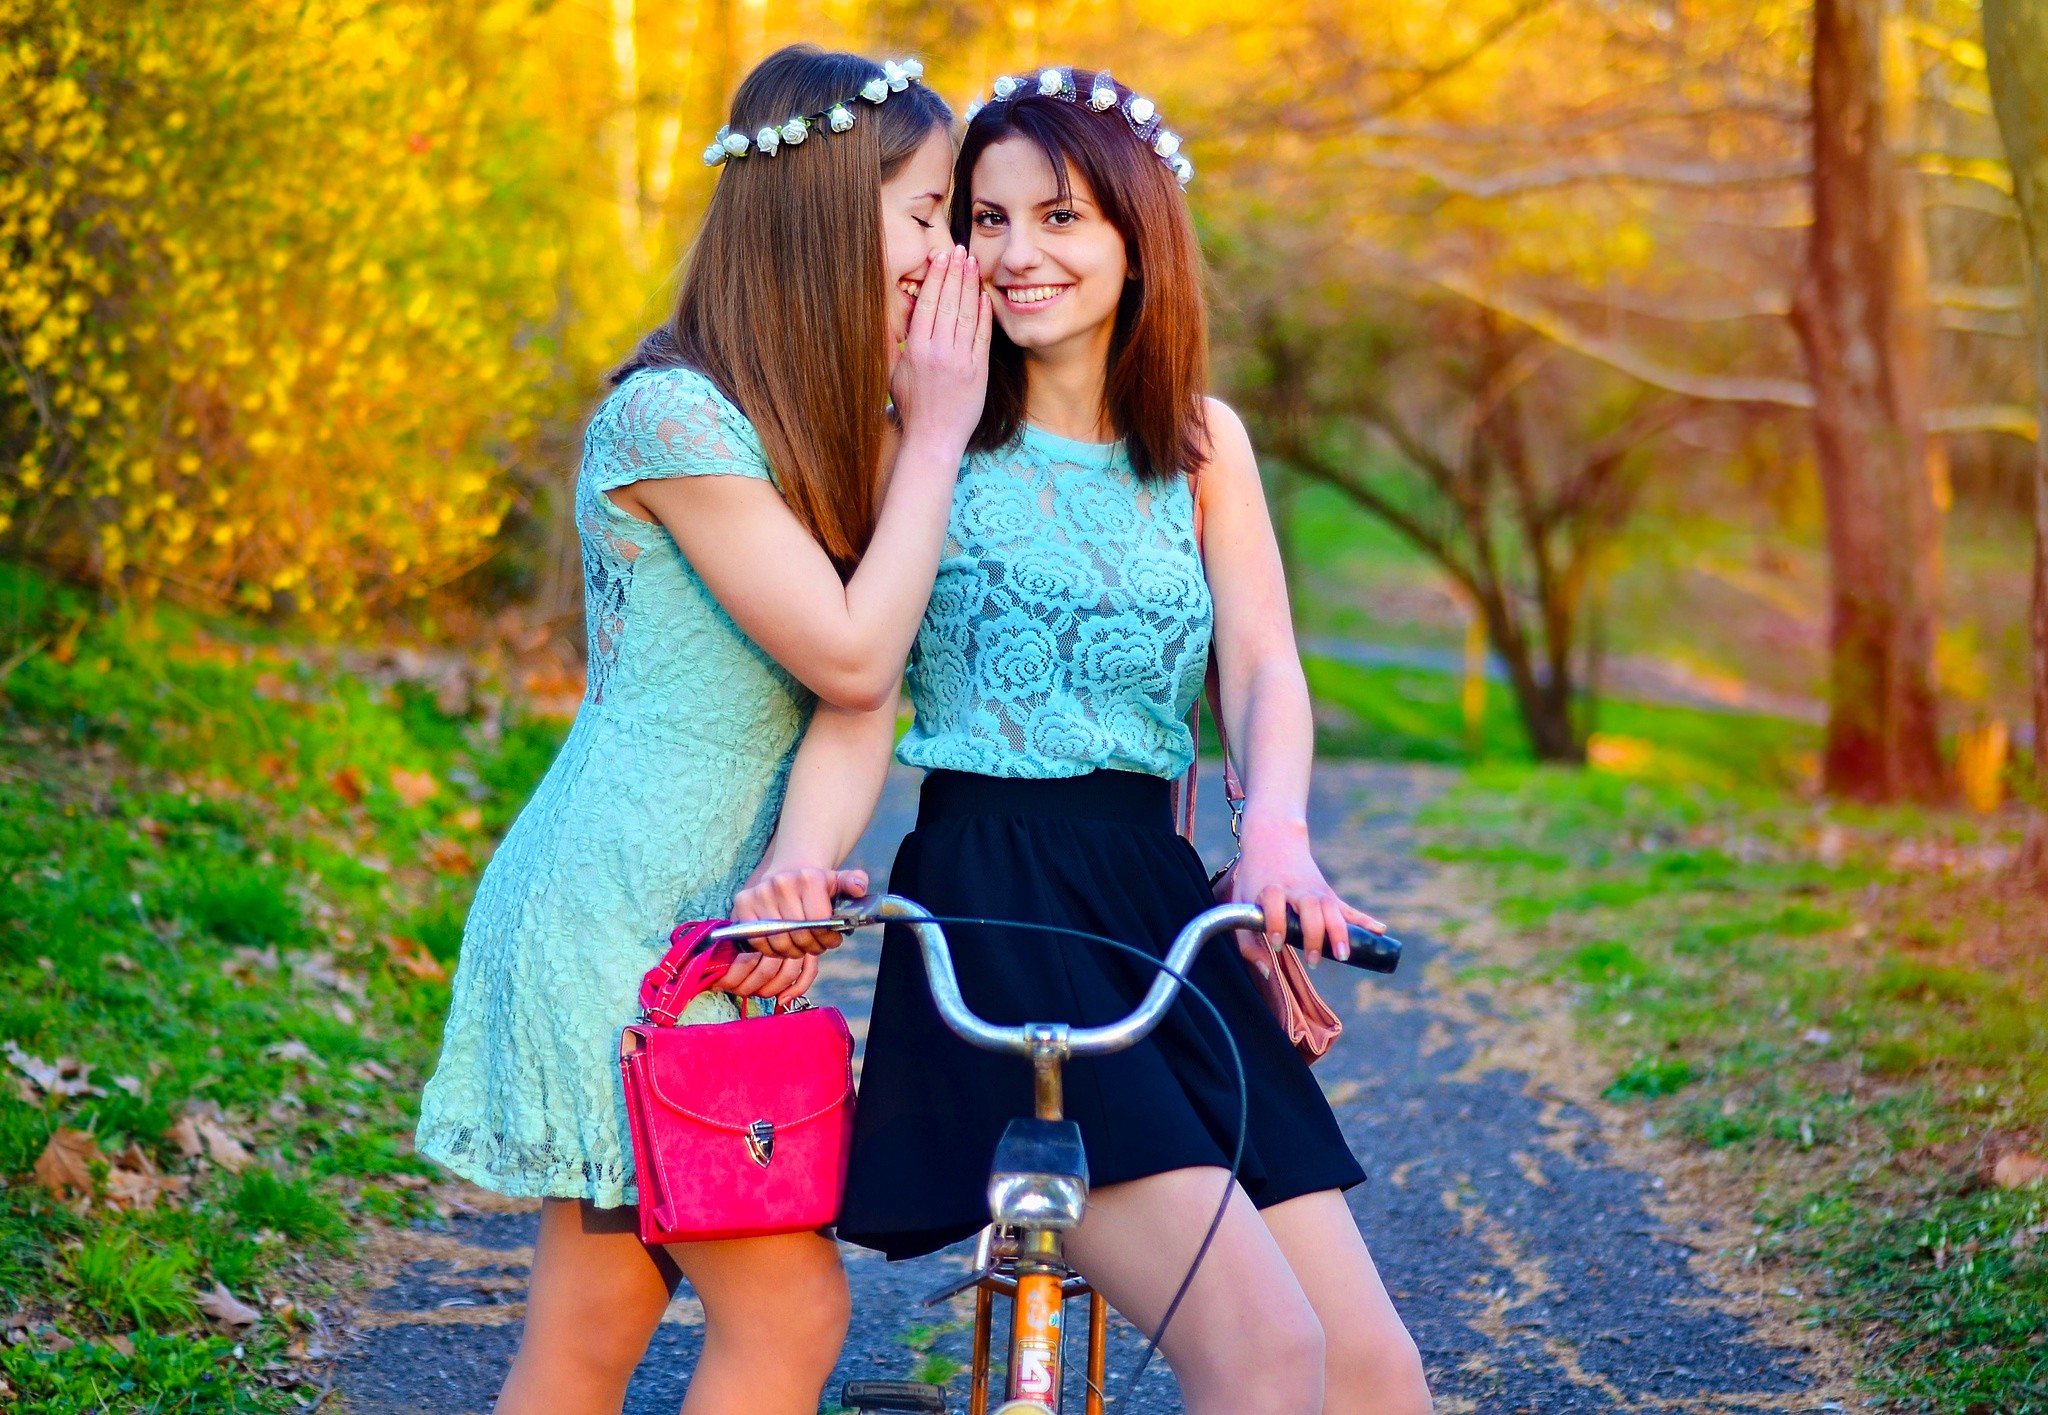 People 2048x1415 women model wreaths friendship see-through blouse brunette women with bicycles smiling happy two women bicycle cyan clothing